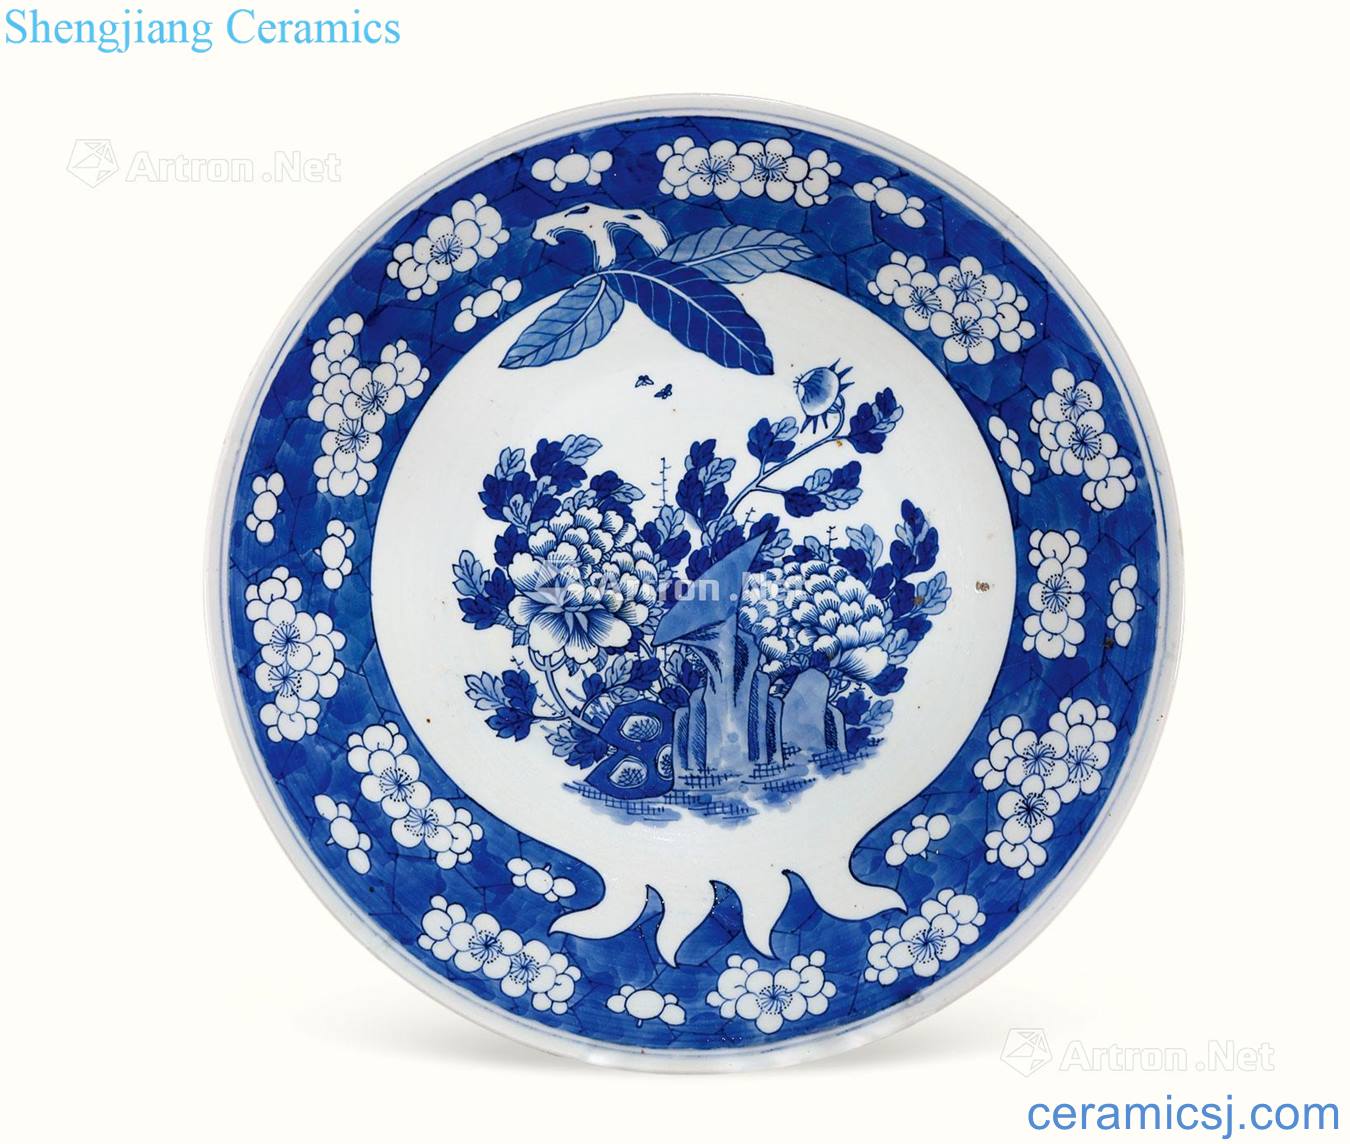 Qing daoguang Blue and white pomegranate medallion